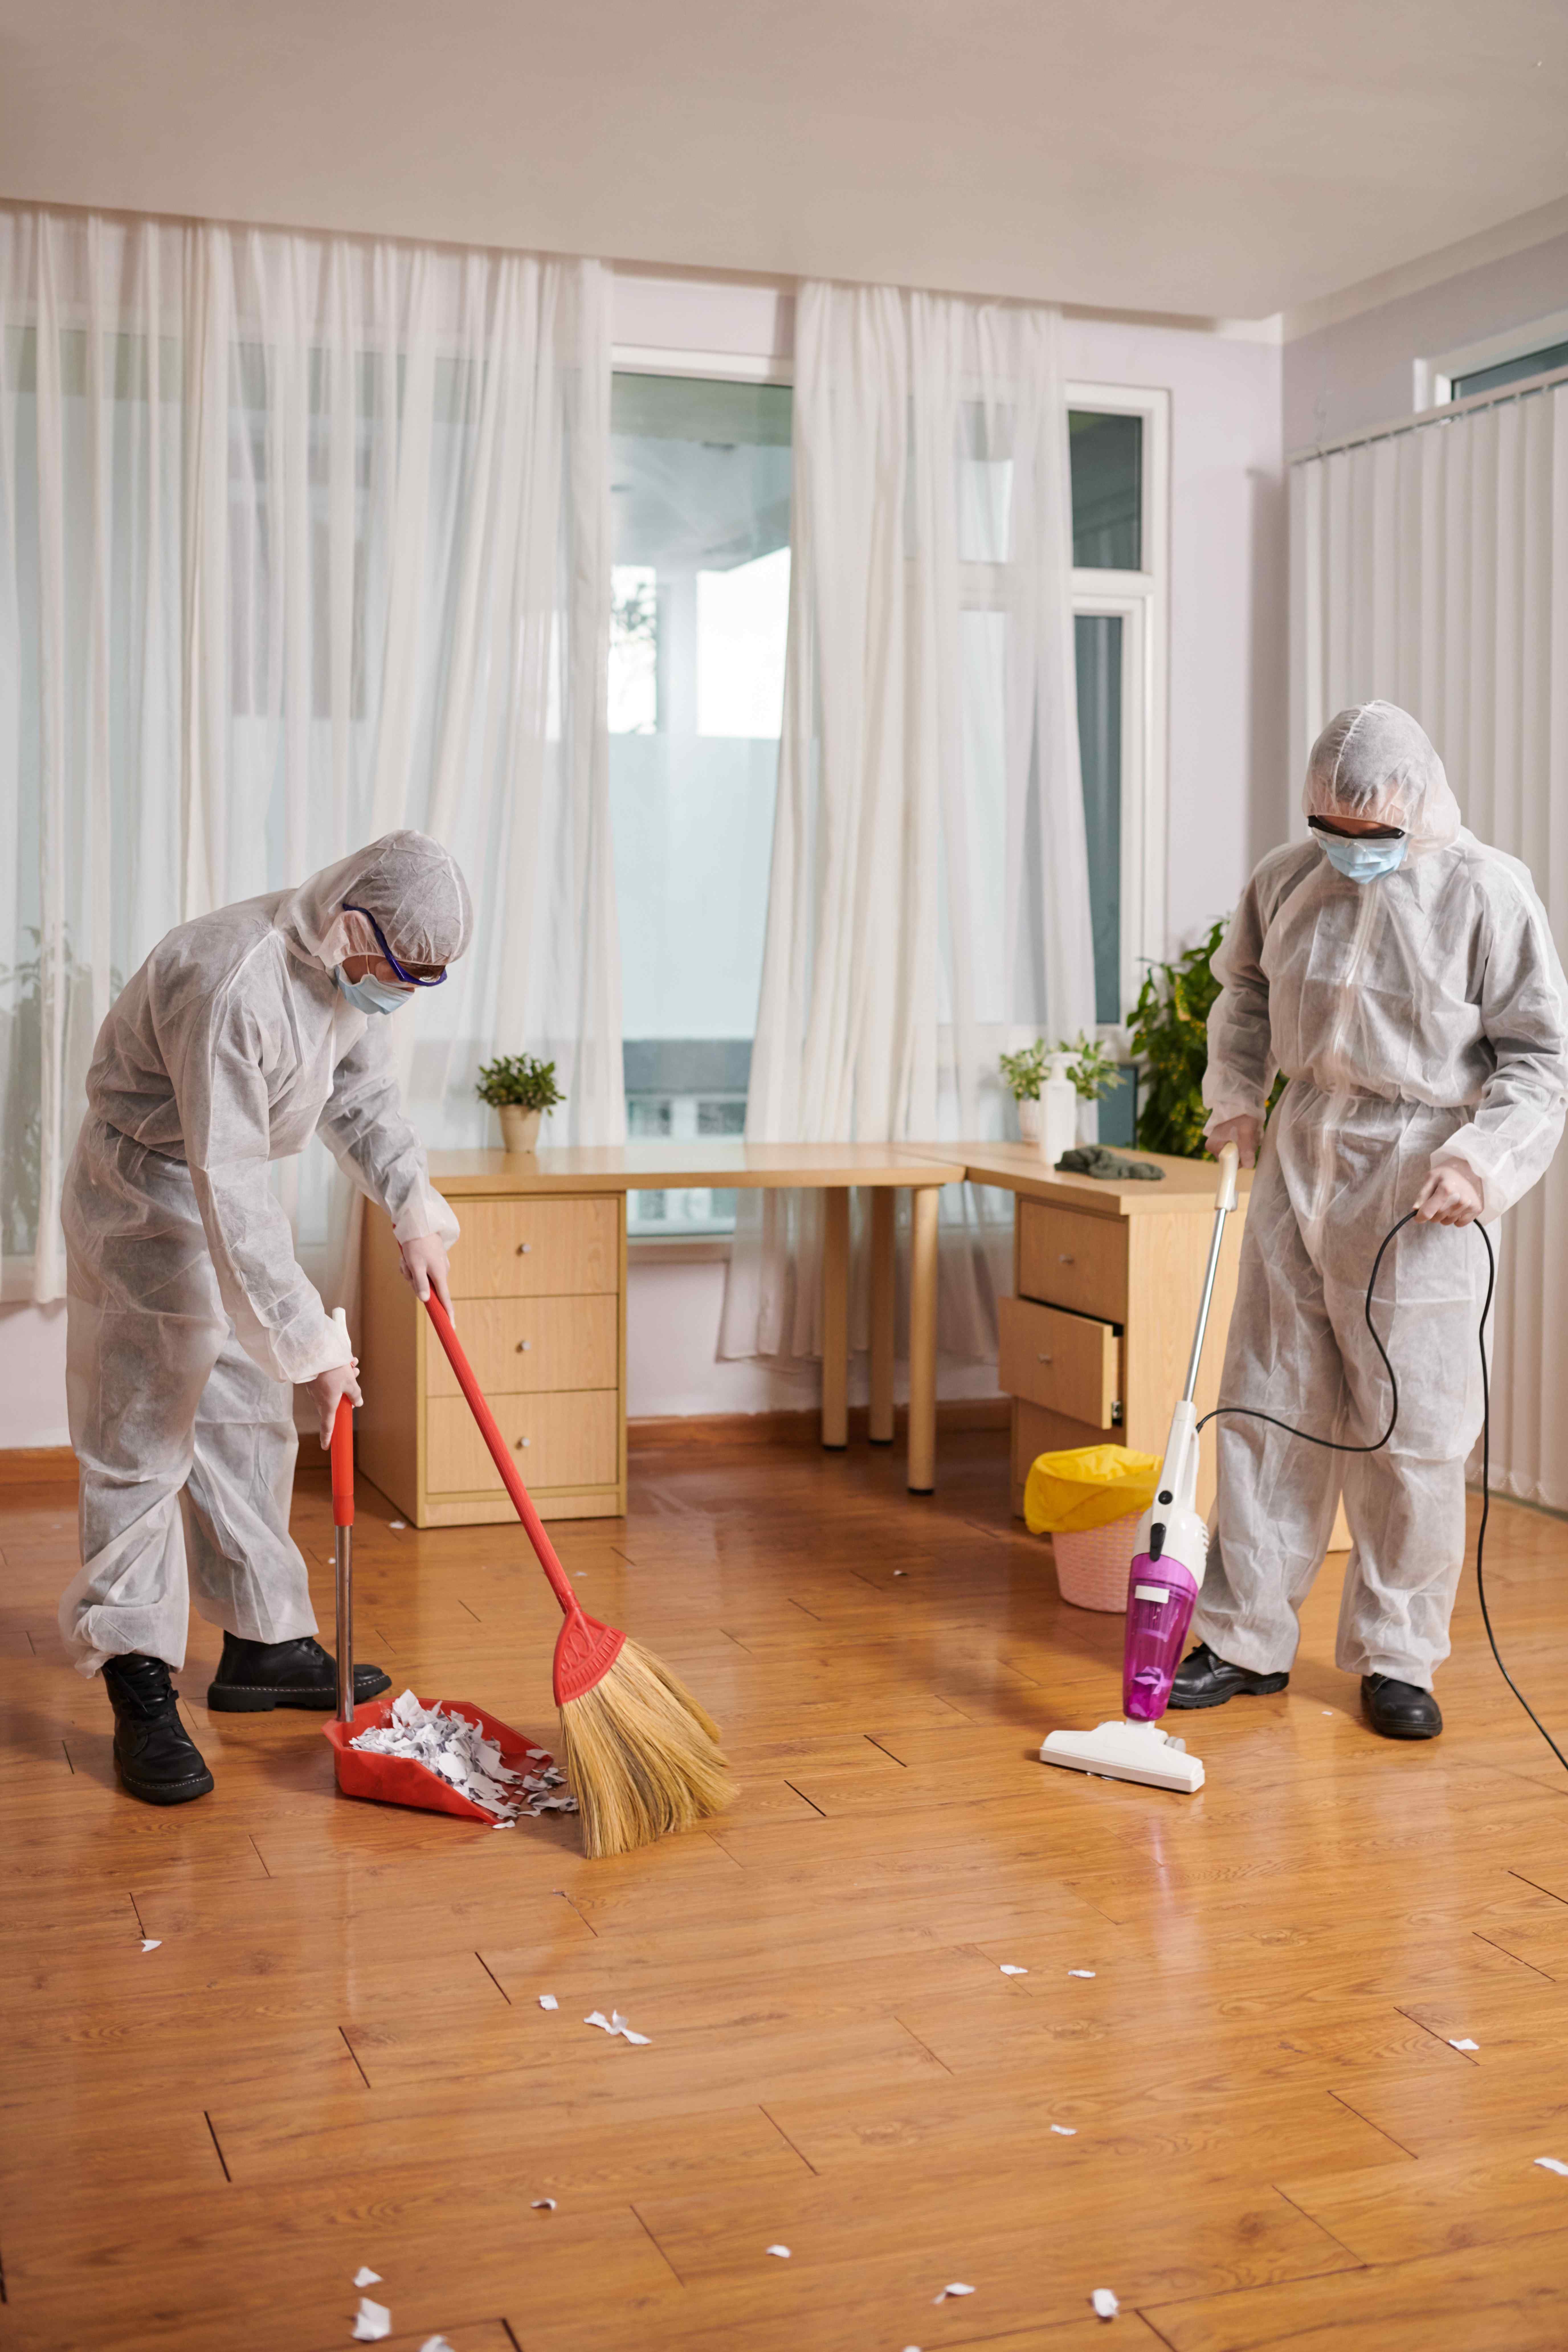 cleaning service workers tidying apartment 2023 02 12 01 57 44 utc - Decon Solutions Australia Services